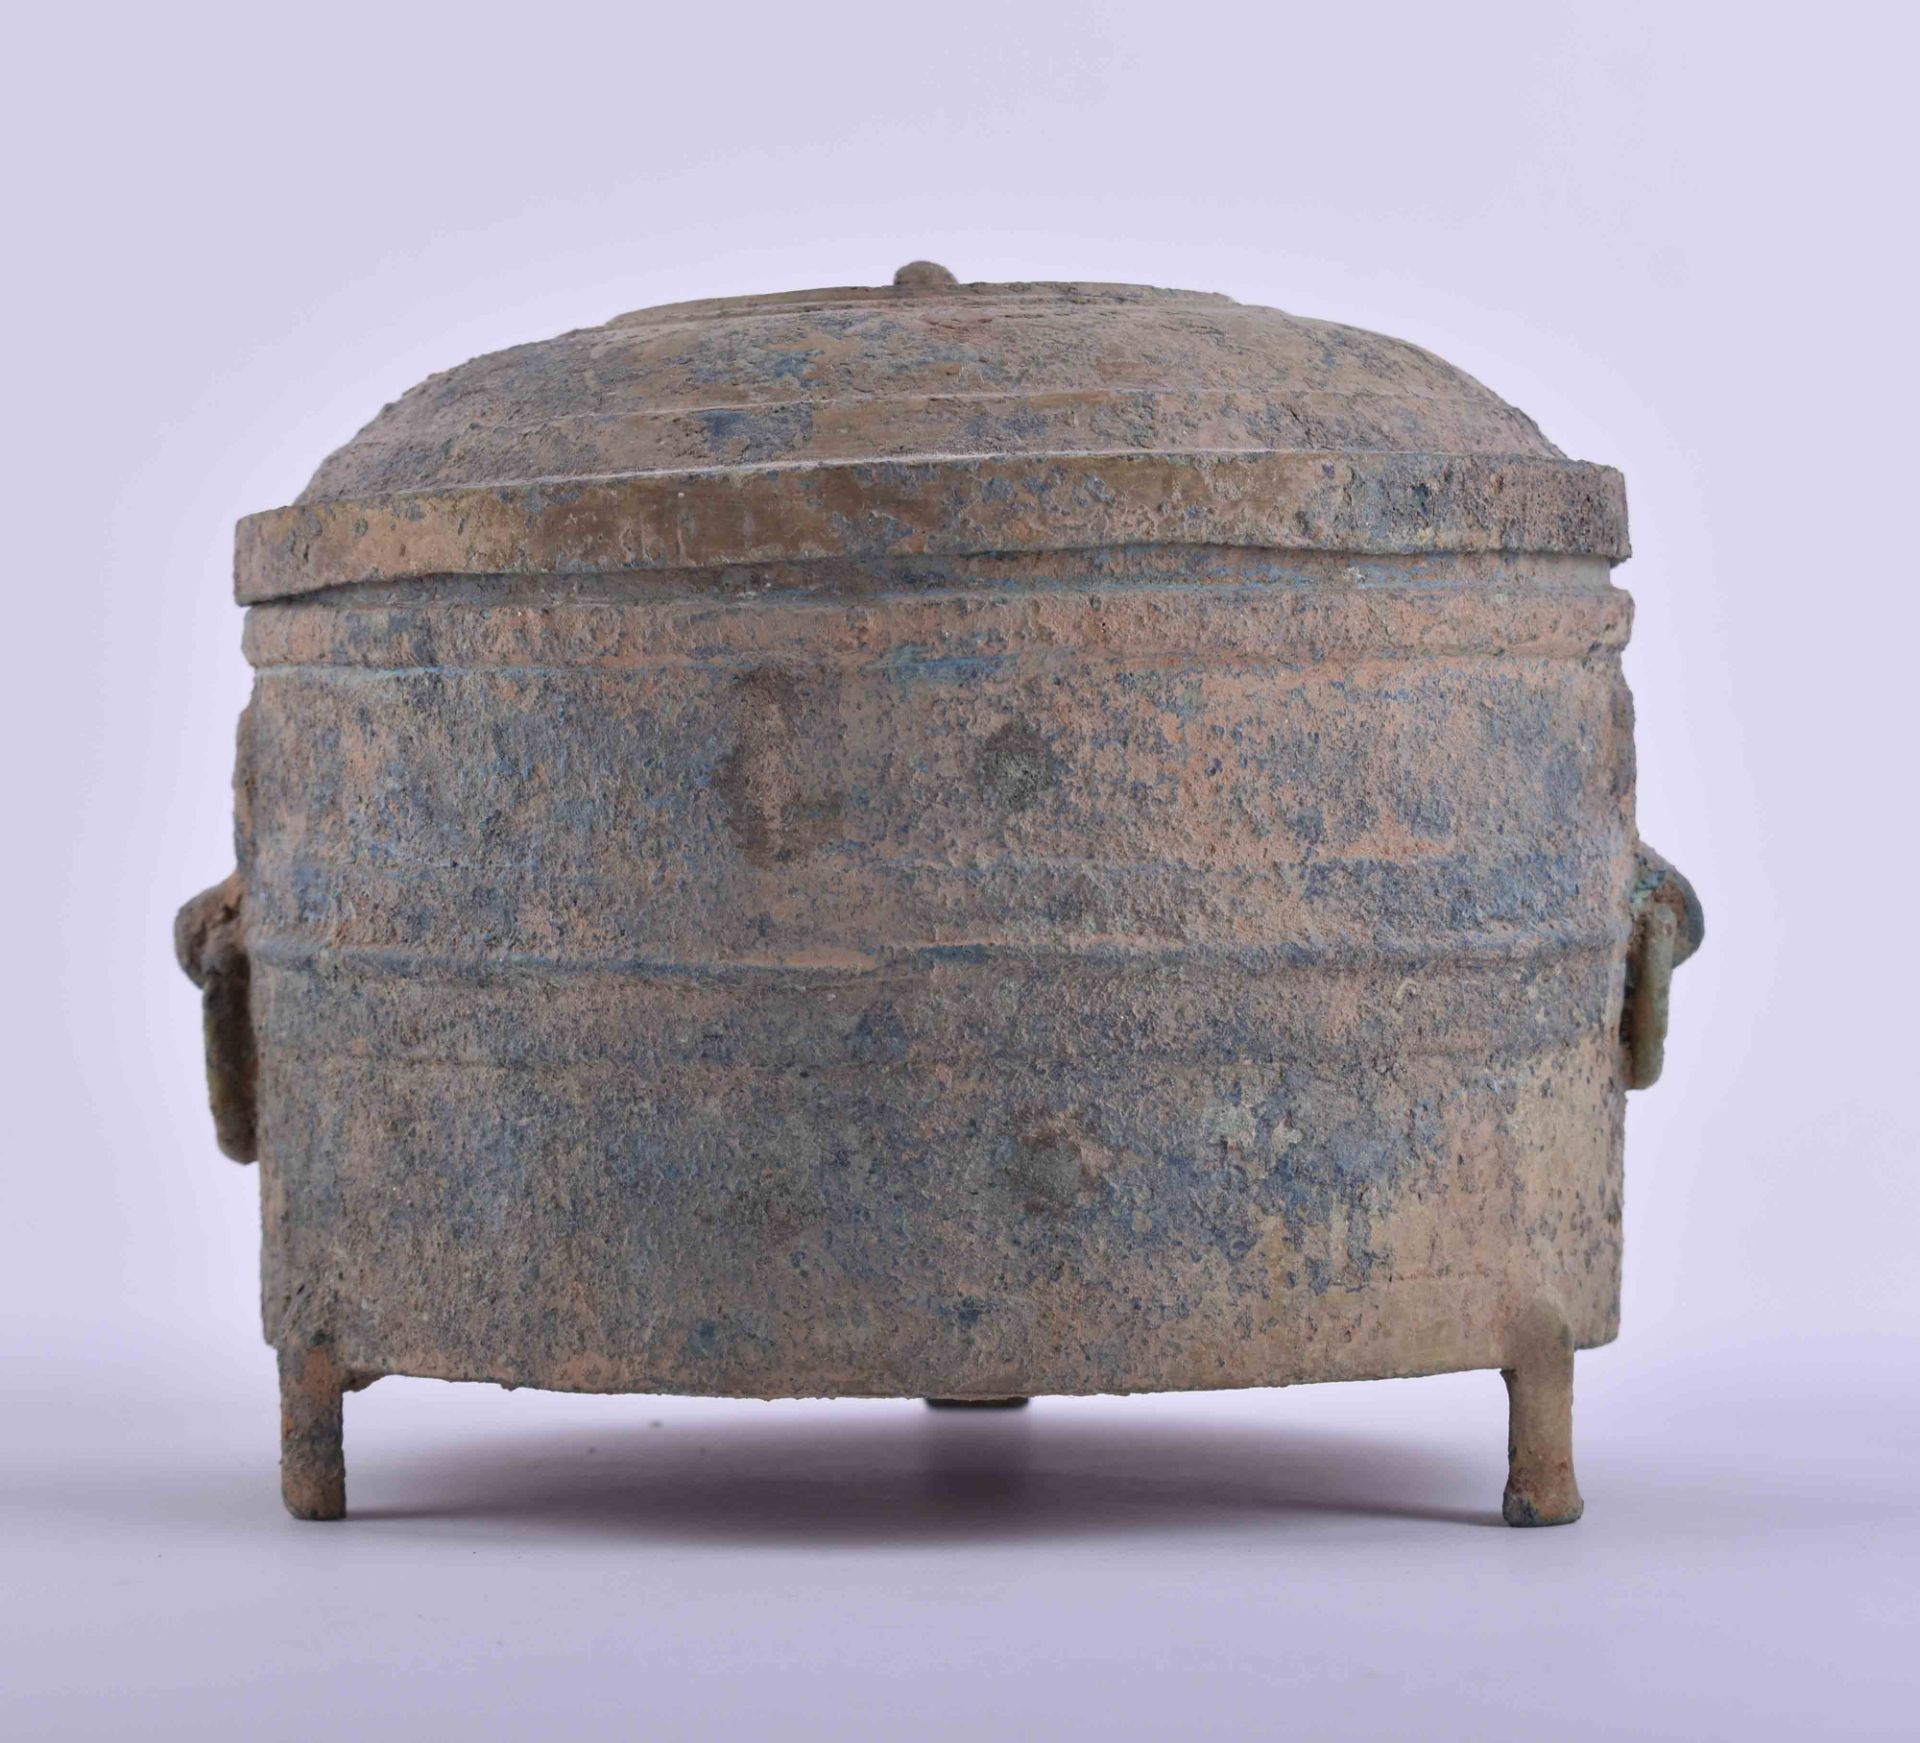  Lid vessel China Han dynasty - Image 3 of 6